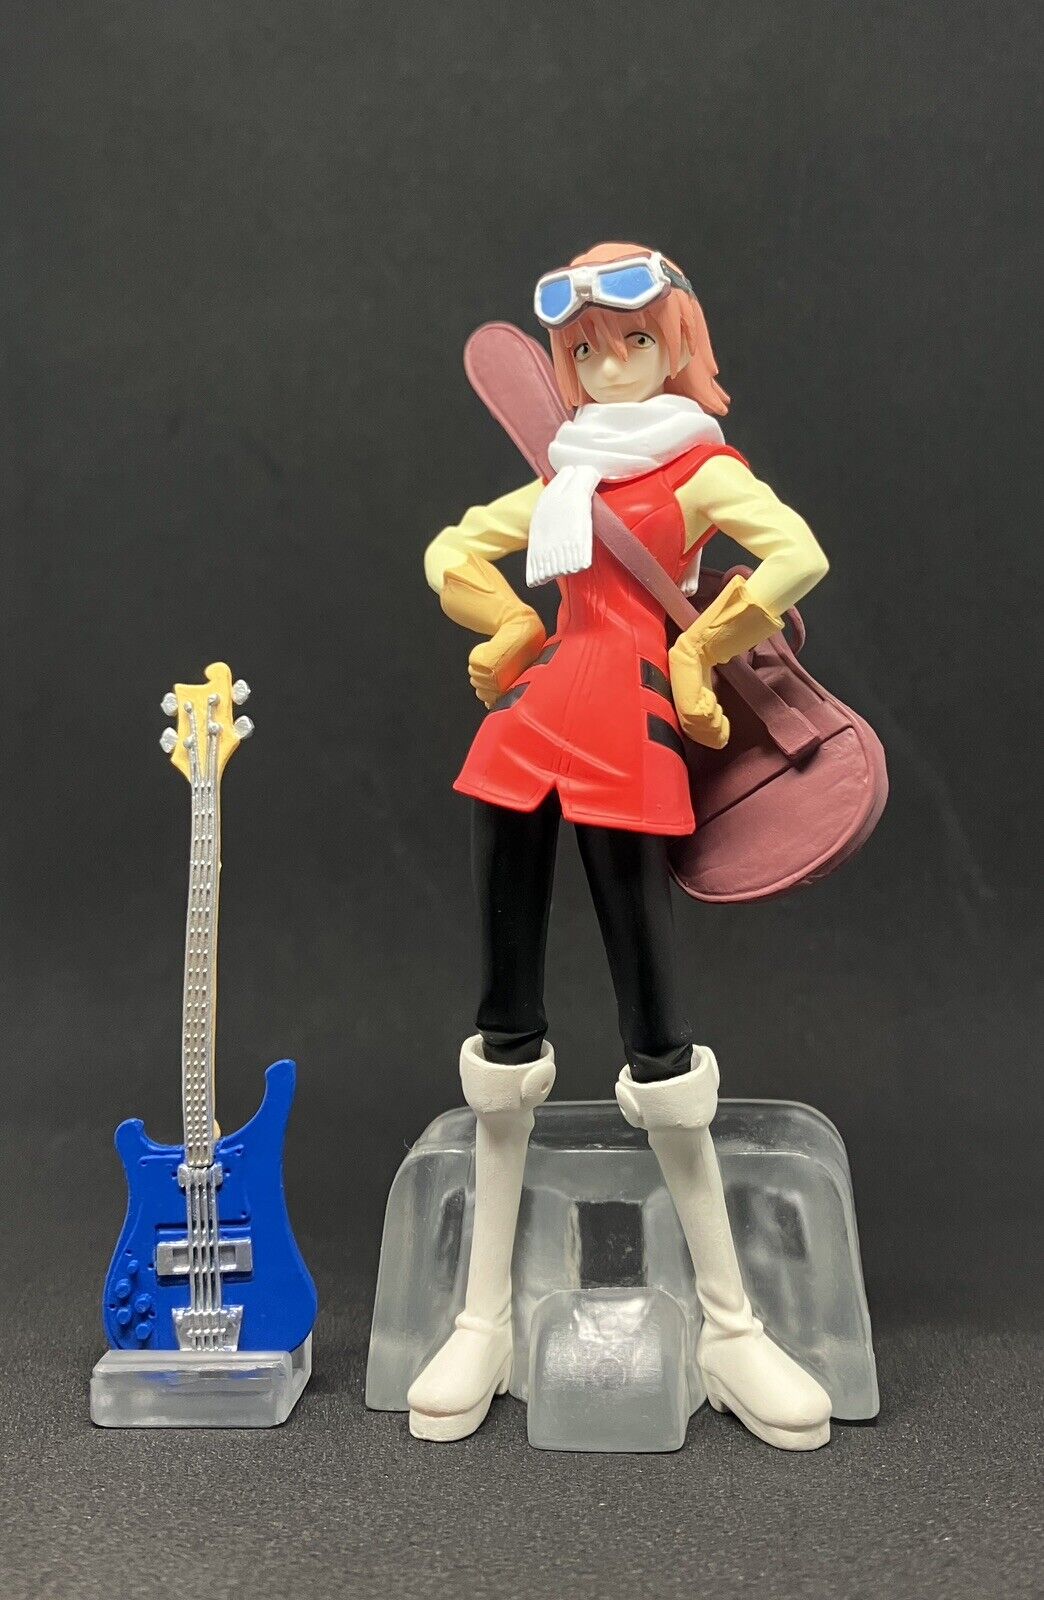 Gainax Hiroines Figure Haruko Haruhara FLCL Fooly Cooly(Bass is a little warped)